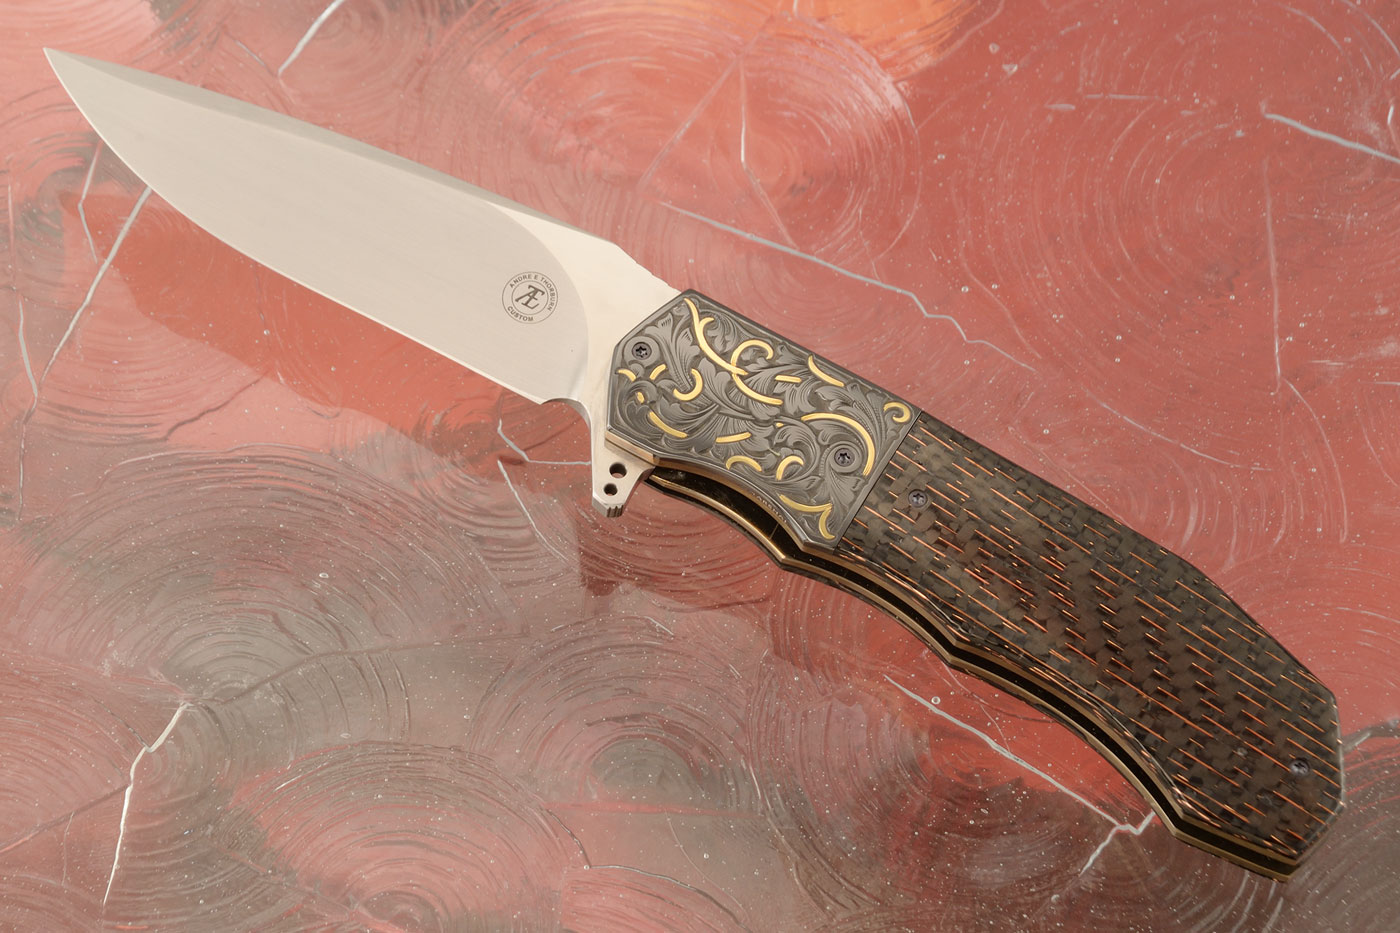 L44 Compact Flipper with Bronze Wire Carbon Fiber and Engraved Zirconium (Ceramic IKBS) - CTS-XHP